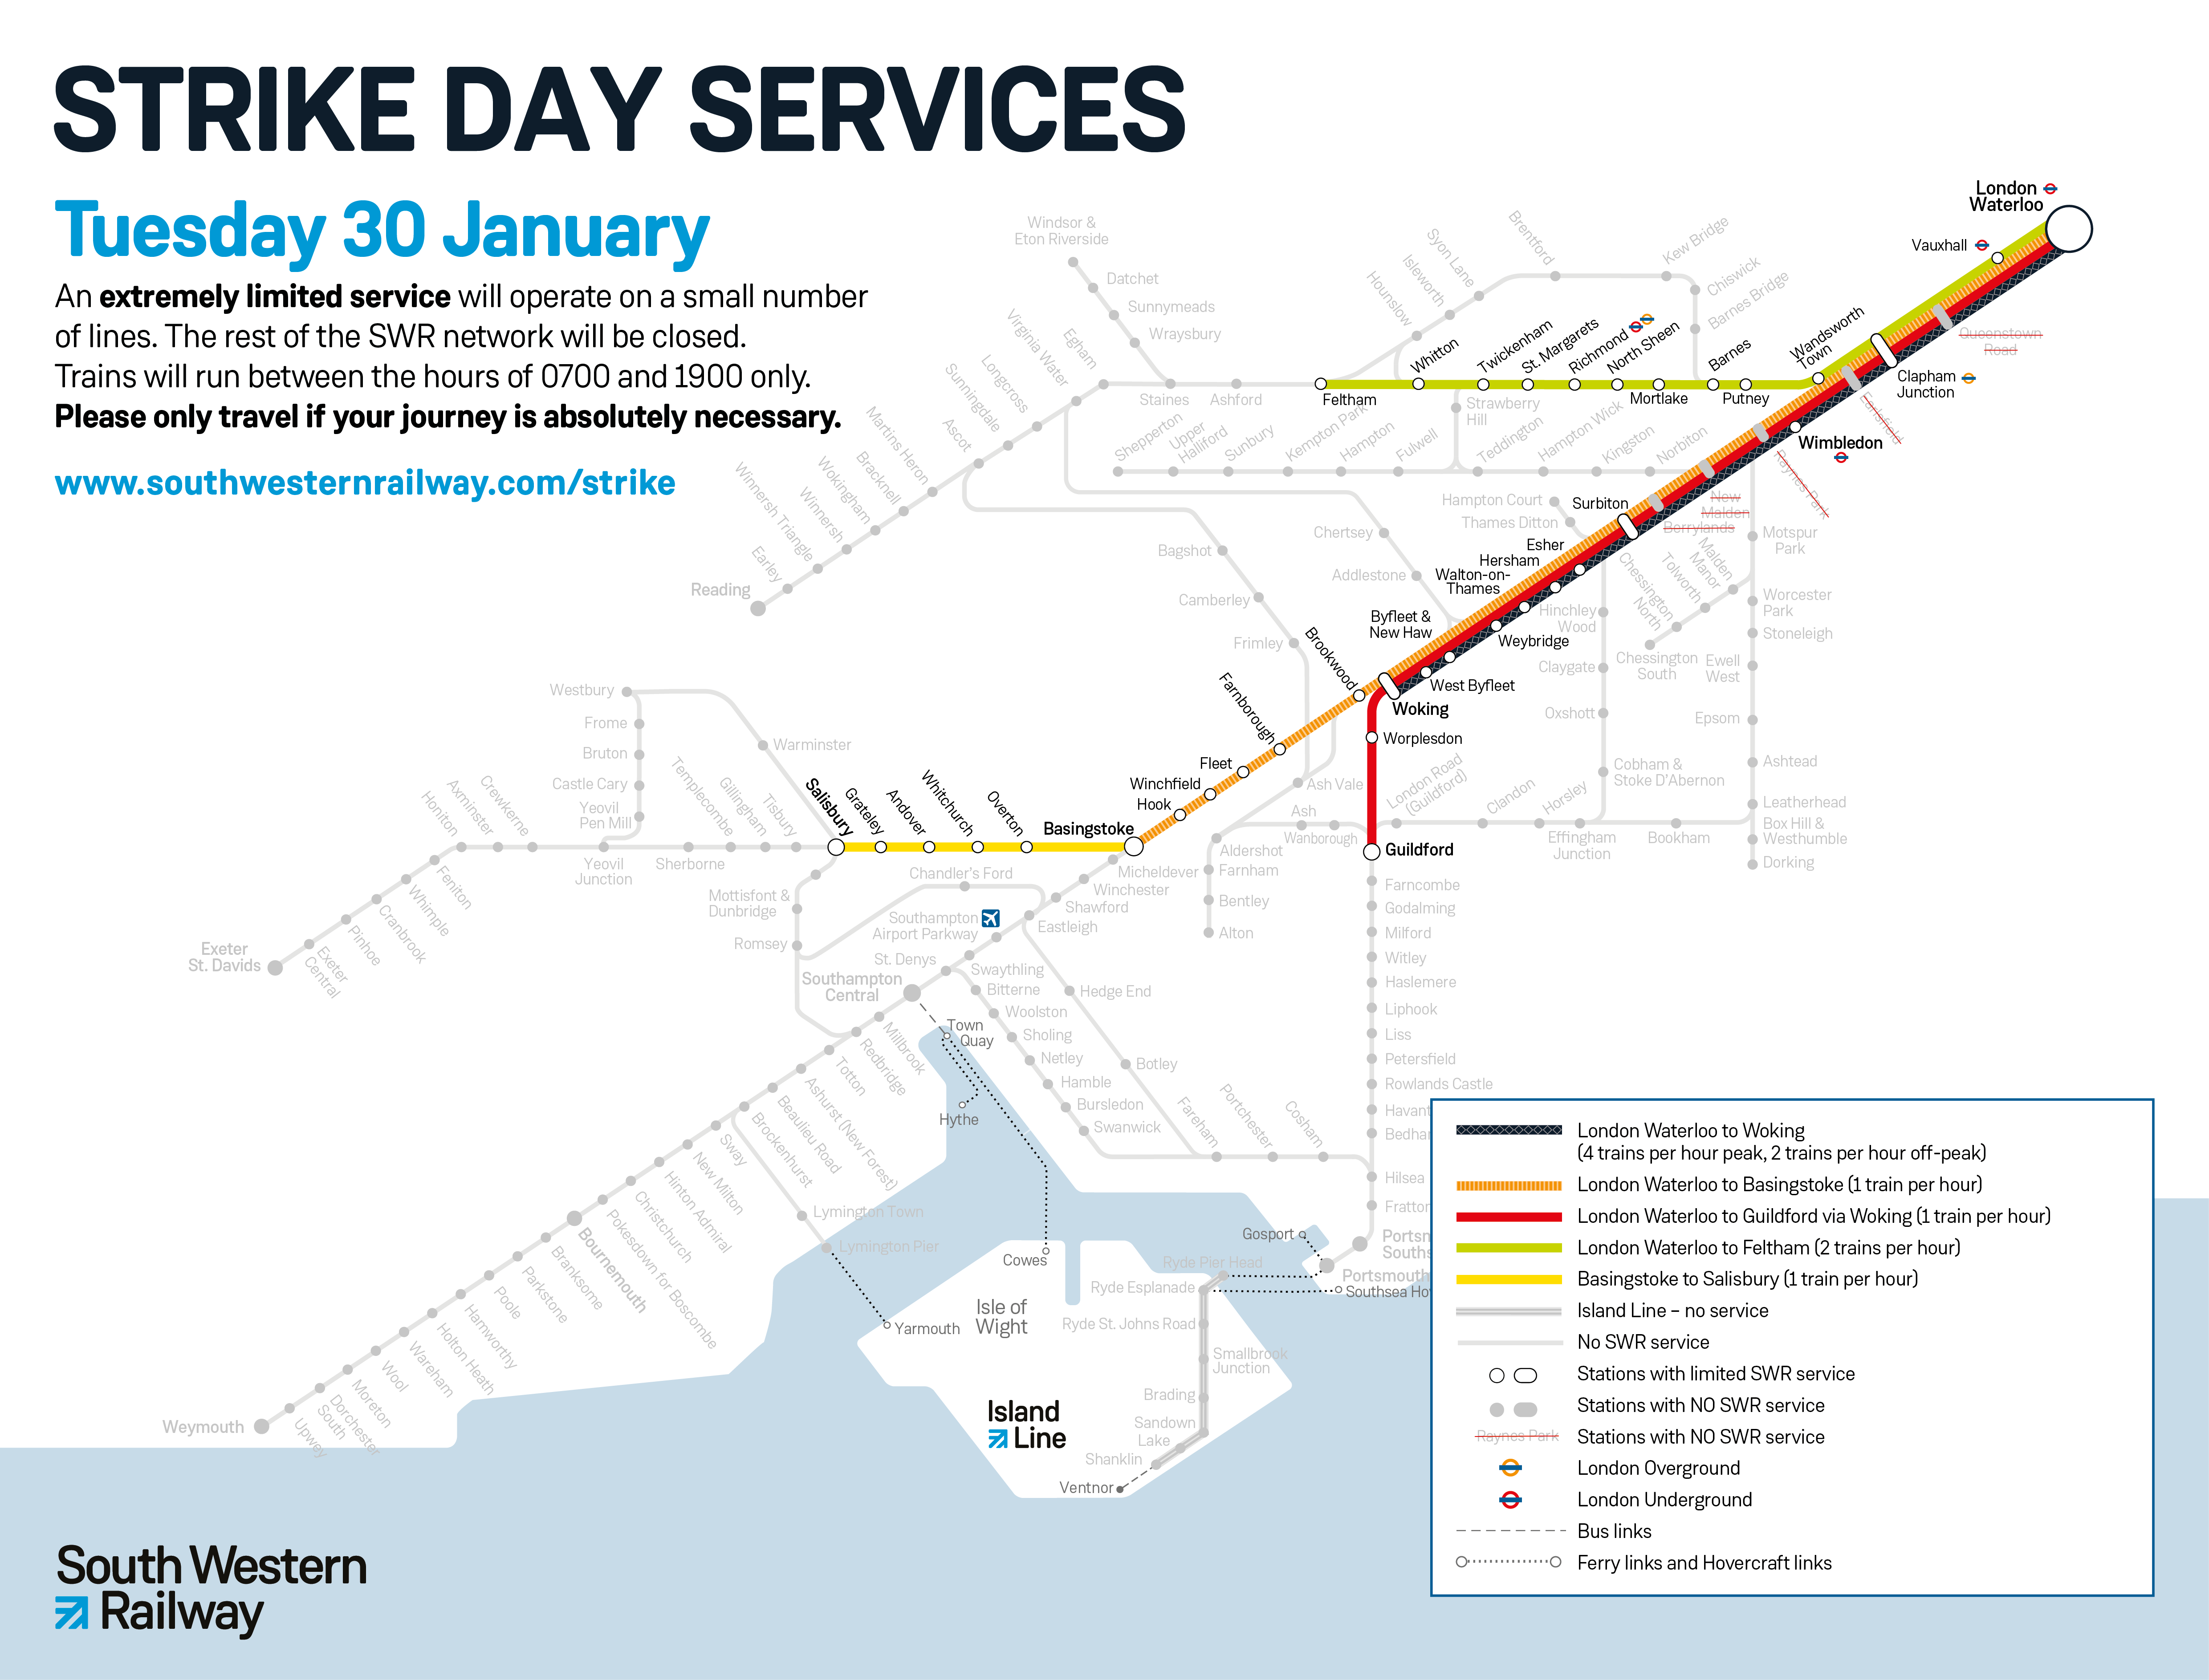 South Western Railway Network map of strike day services for Tuesday 30 January